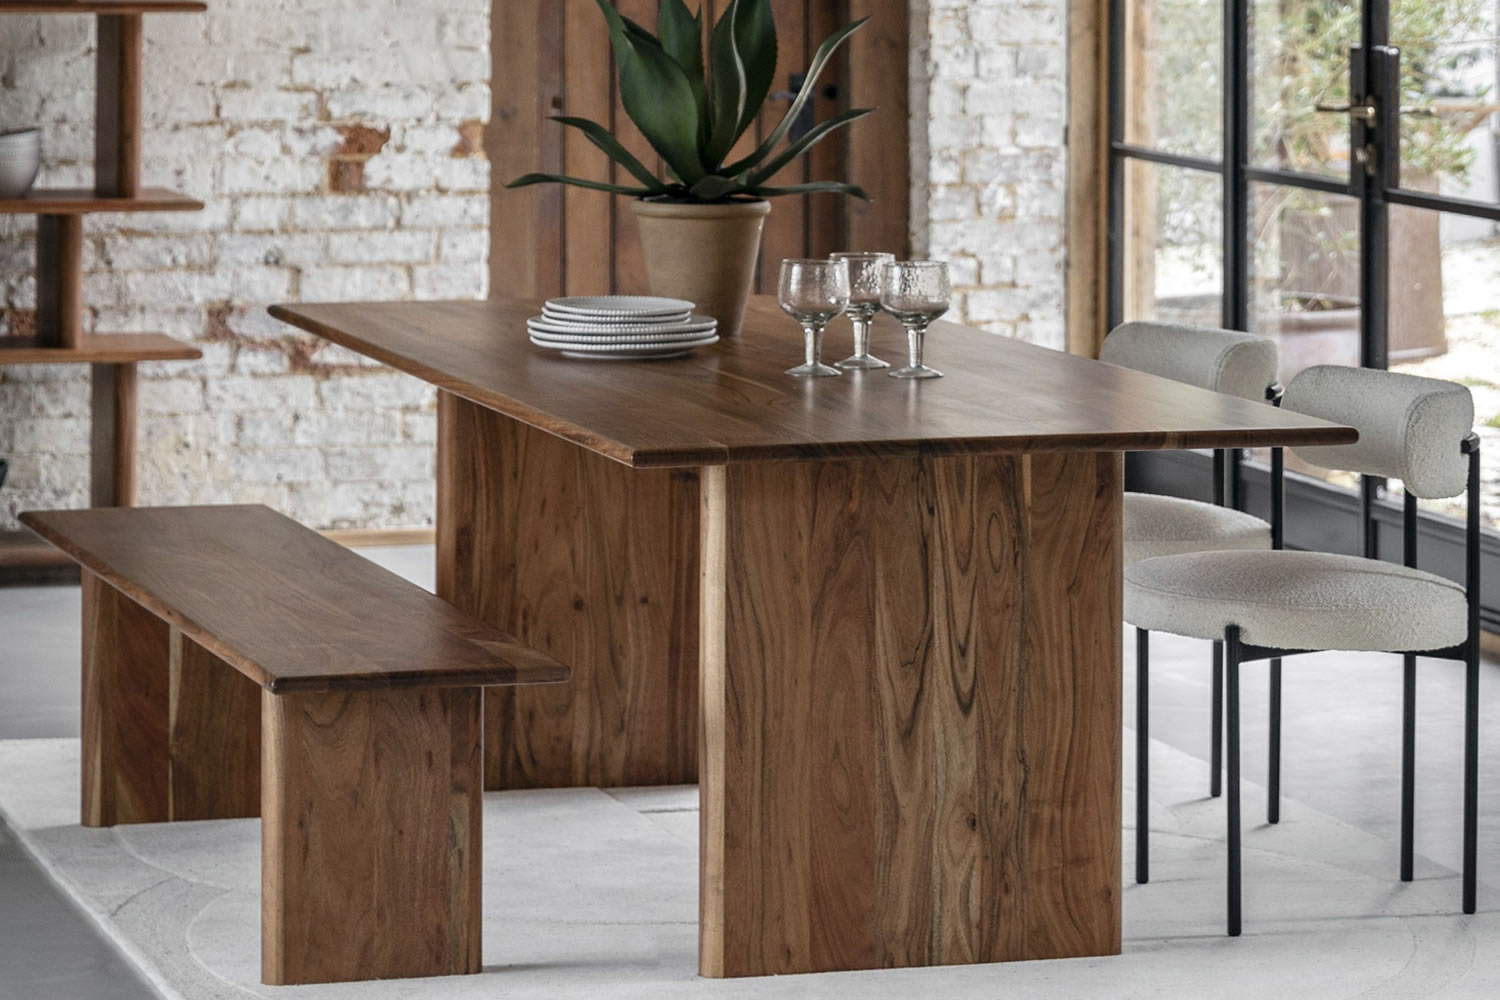 View Borden Large Wooden Kitchen Dining Table Crafted From Solid Acacia Wood Rich Grain Finish Robust Solid Legs Seats Up To 810 People information